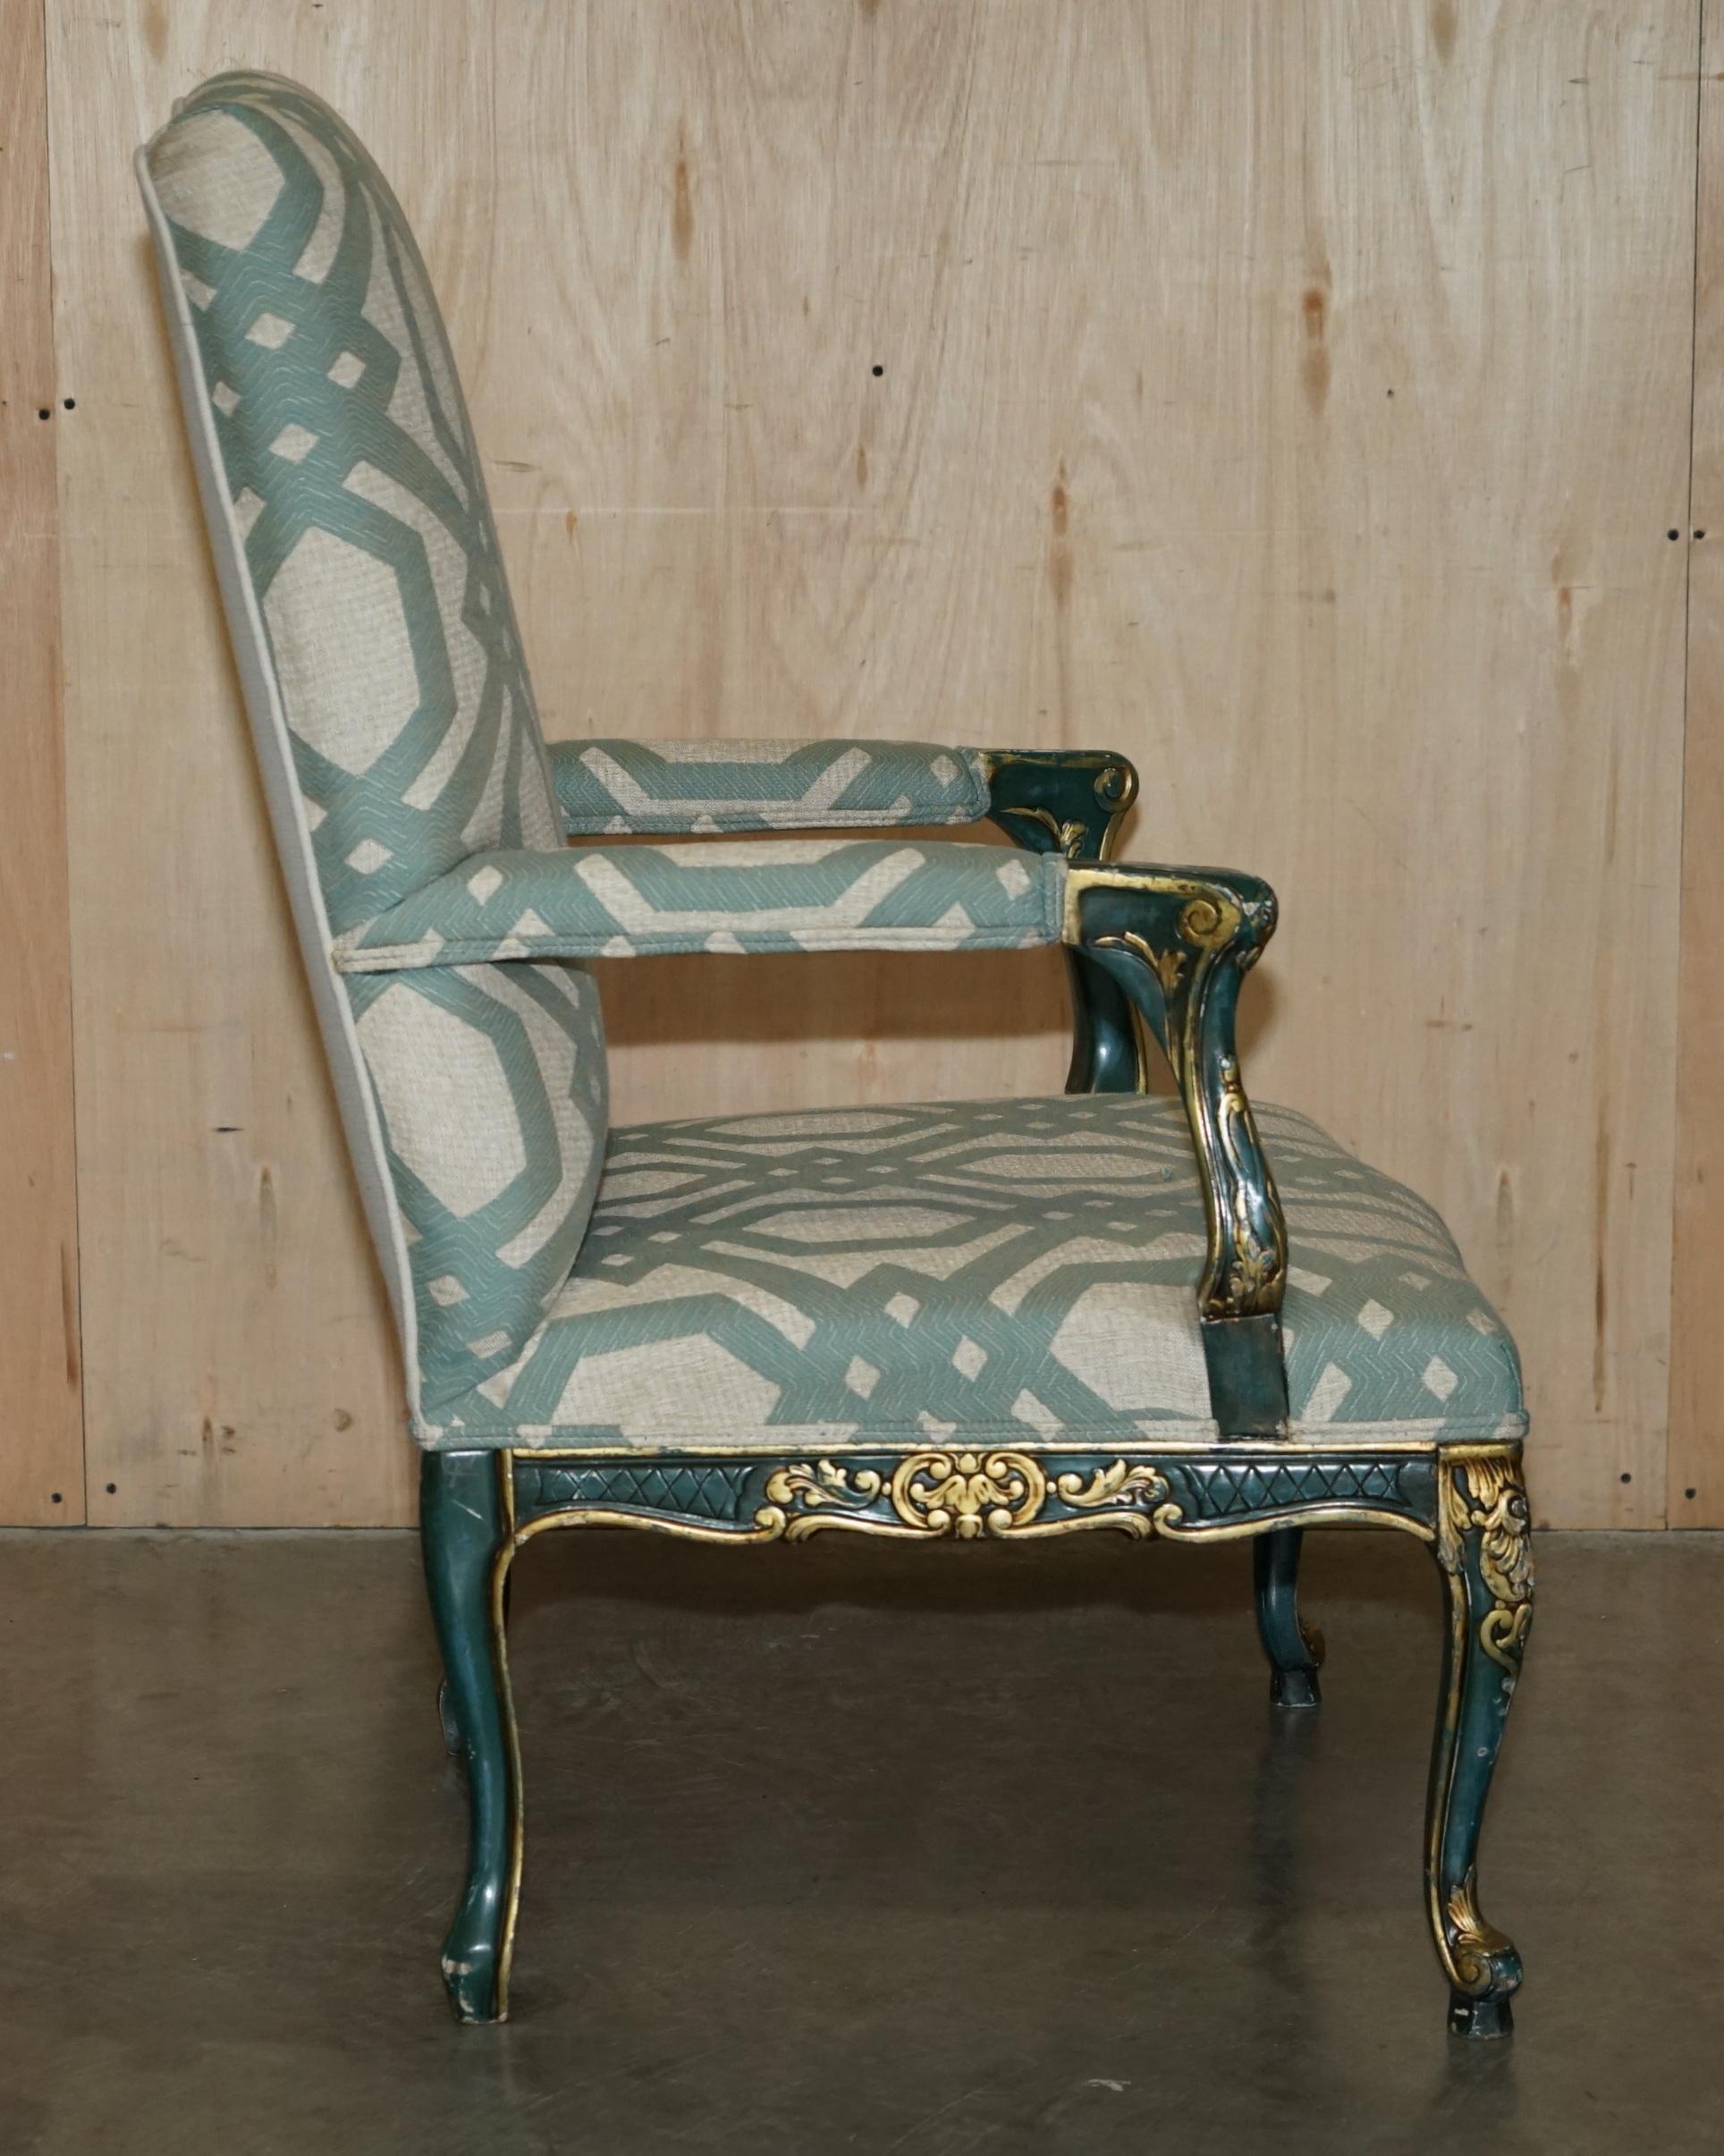 PAIR OF ViNTAGE PAINTED GREEN FRENCH FRATELLI ARMCHAIRS ORNATELY CARVED FRAMES For Sale 4